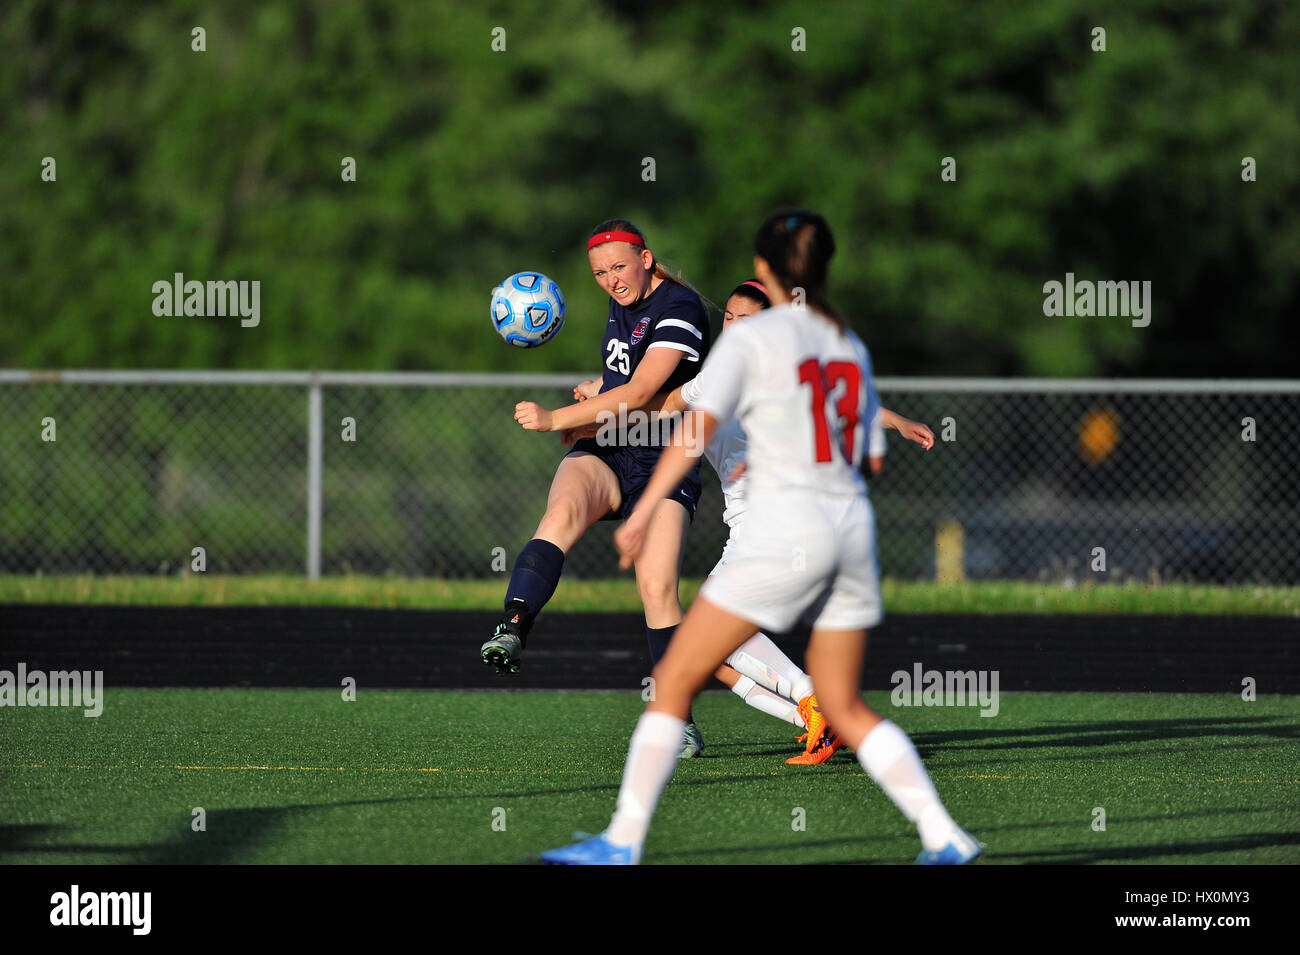 A player delivering a cross that would be headed in by teammate for a goal during a high school match. USA. Stock Photo